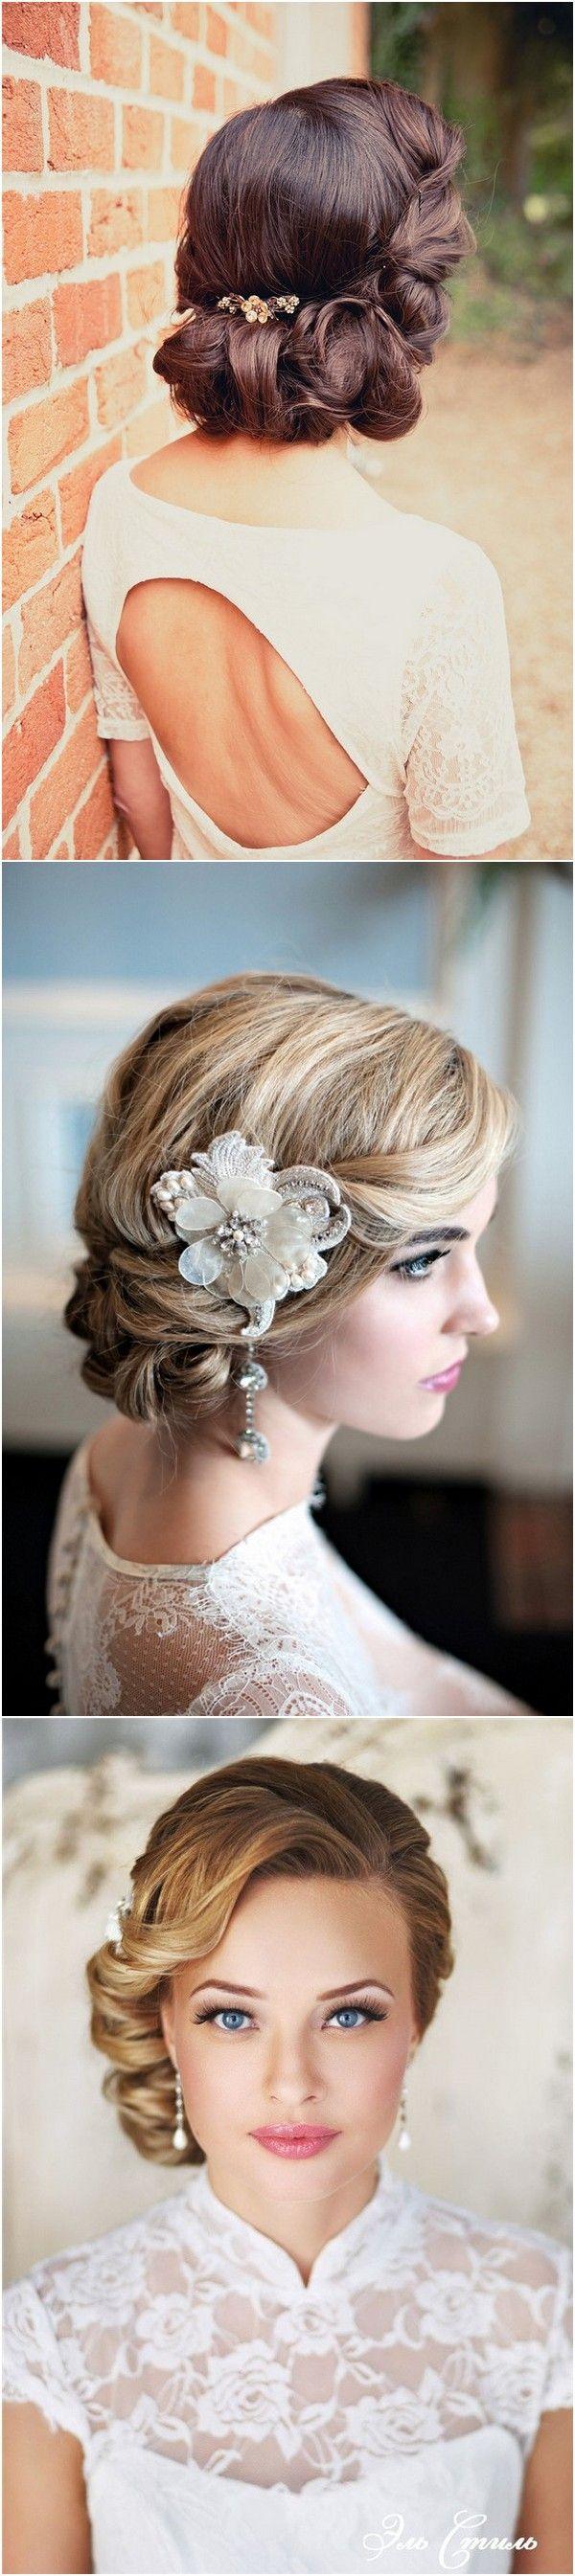 Mariage - Top 20 Vintage Wedding Hairstyles For Brides - Page 2 Of 3